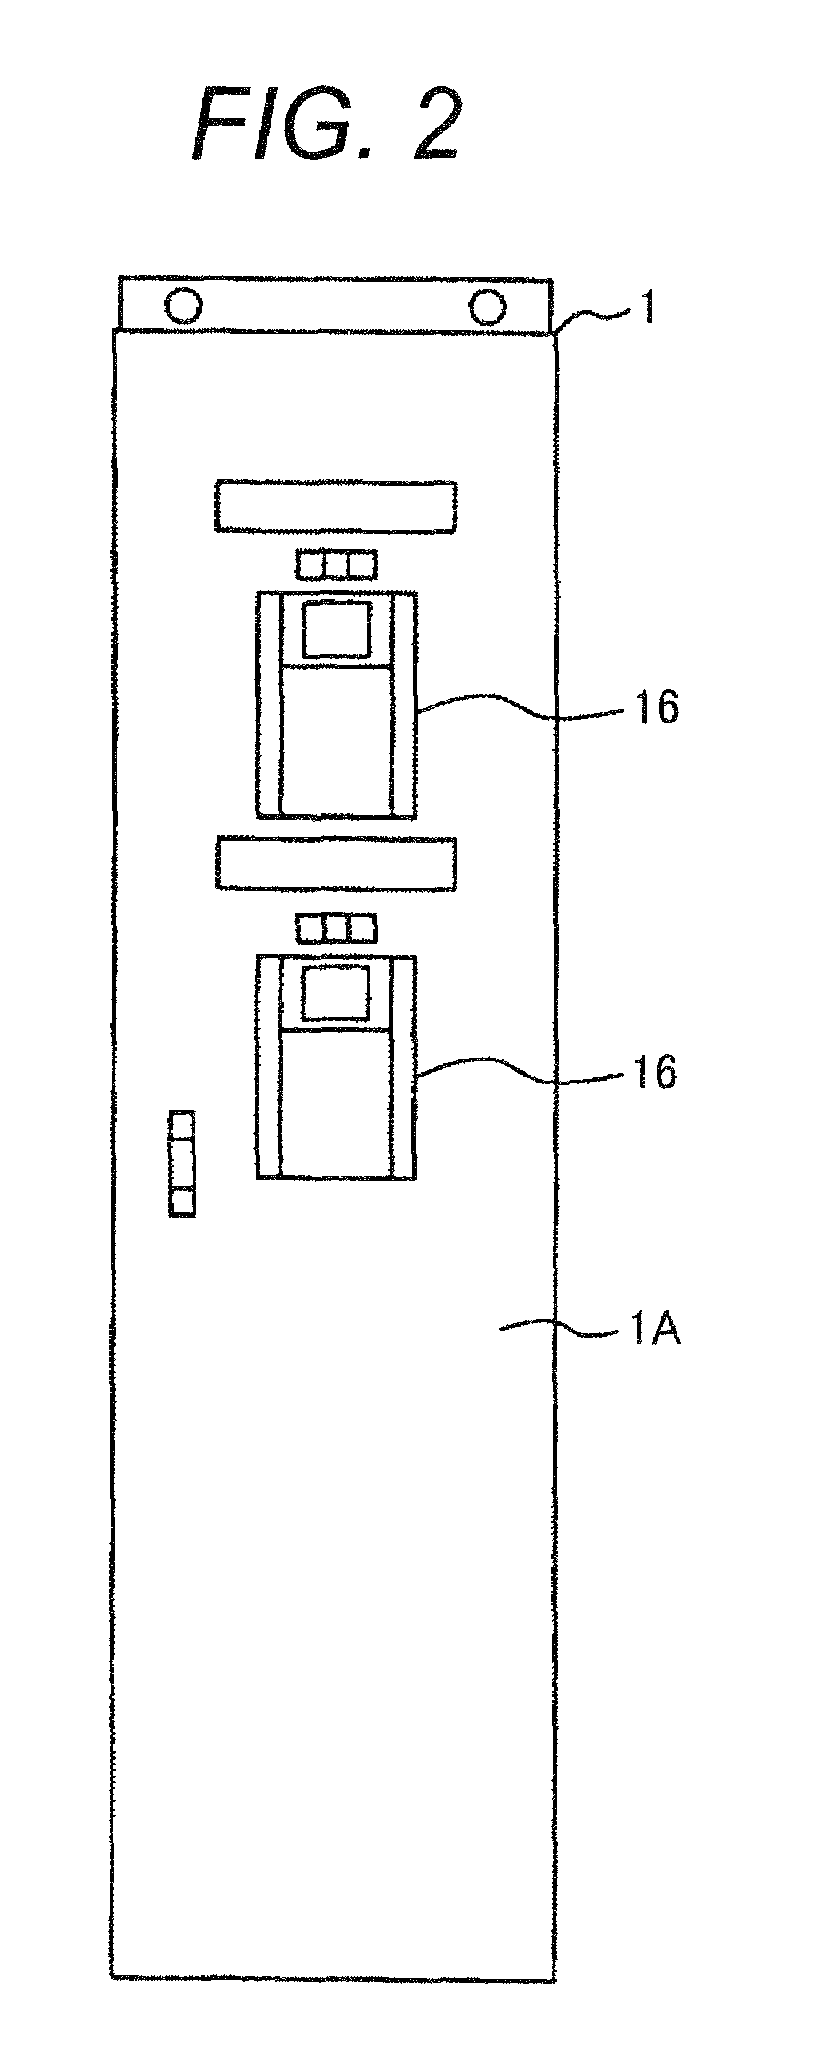 Solid insulated bus switchgear